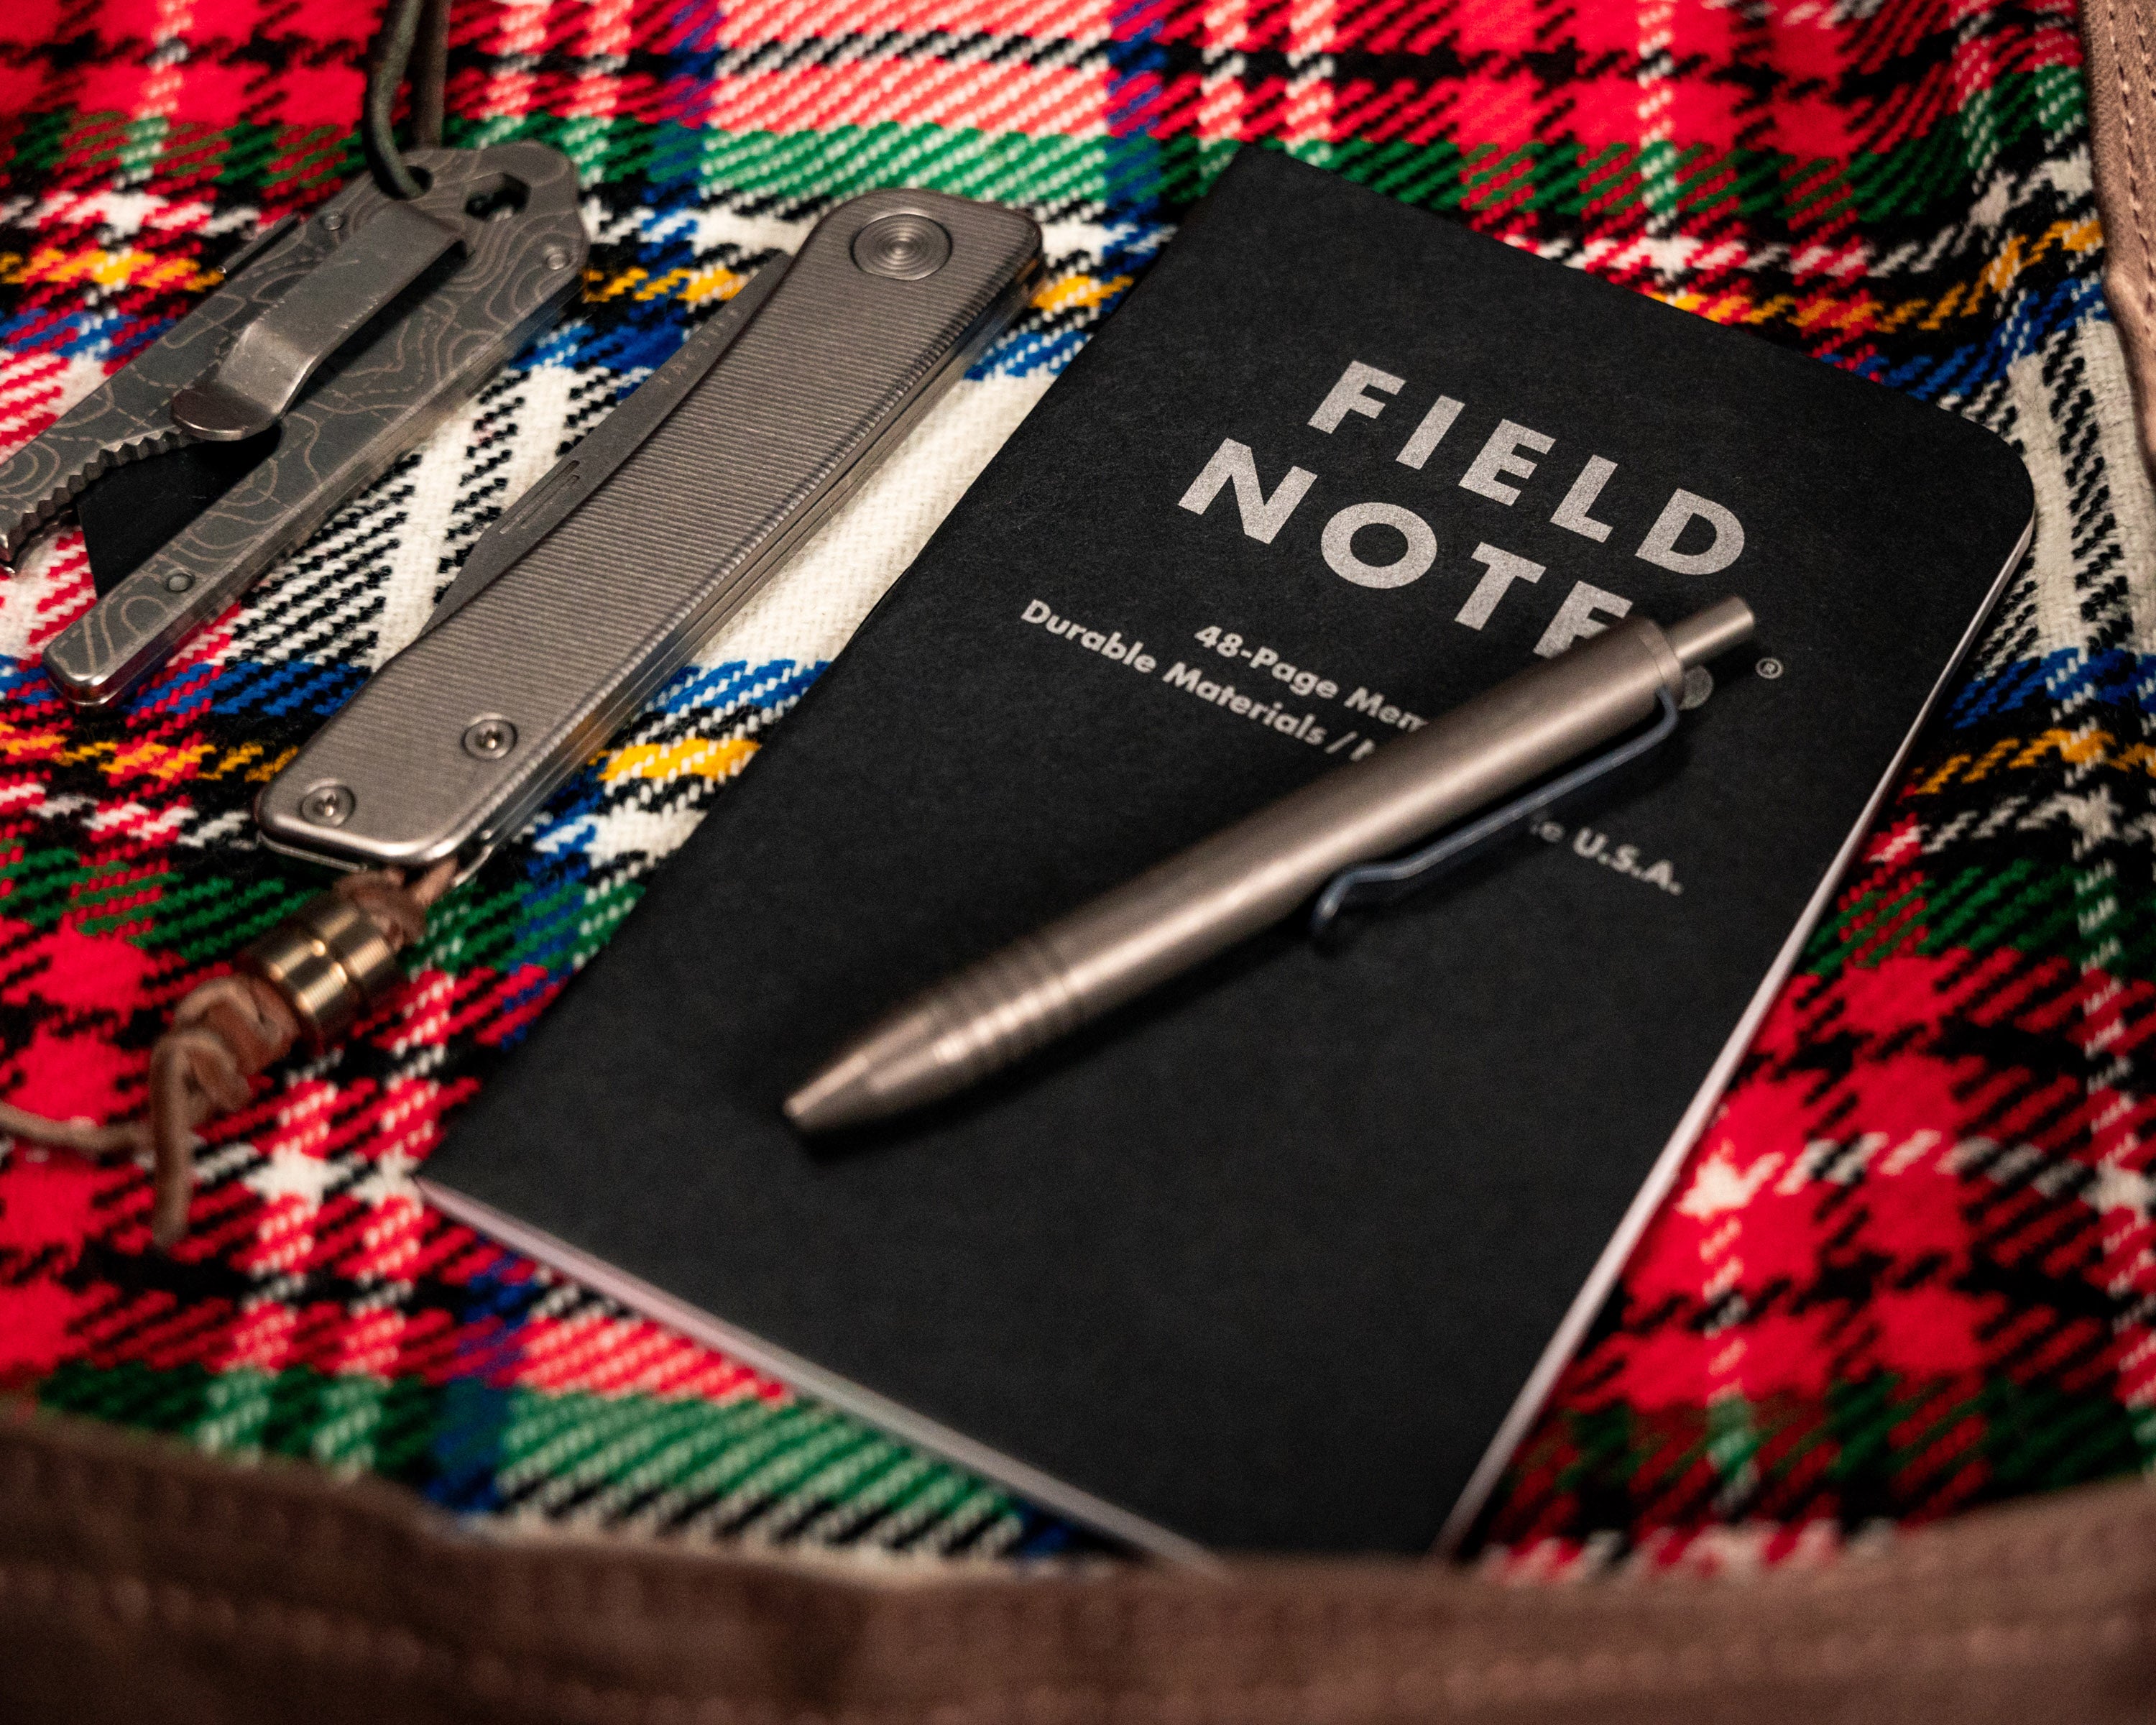 Field Notes 3-Pack